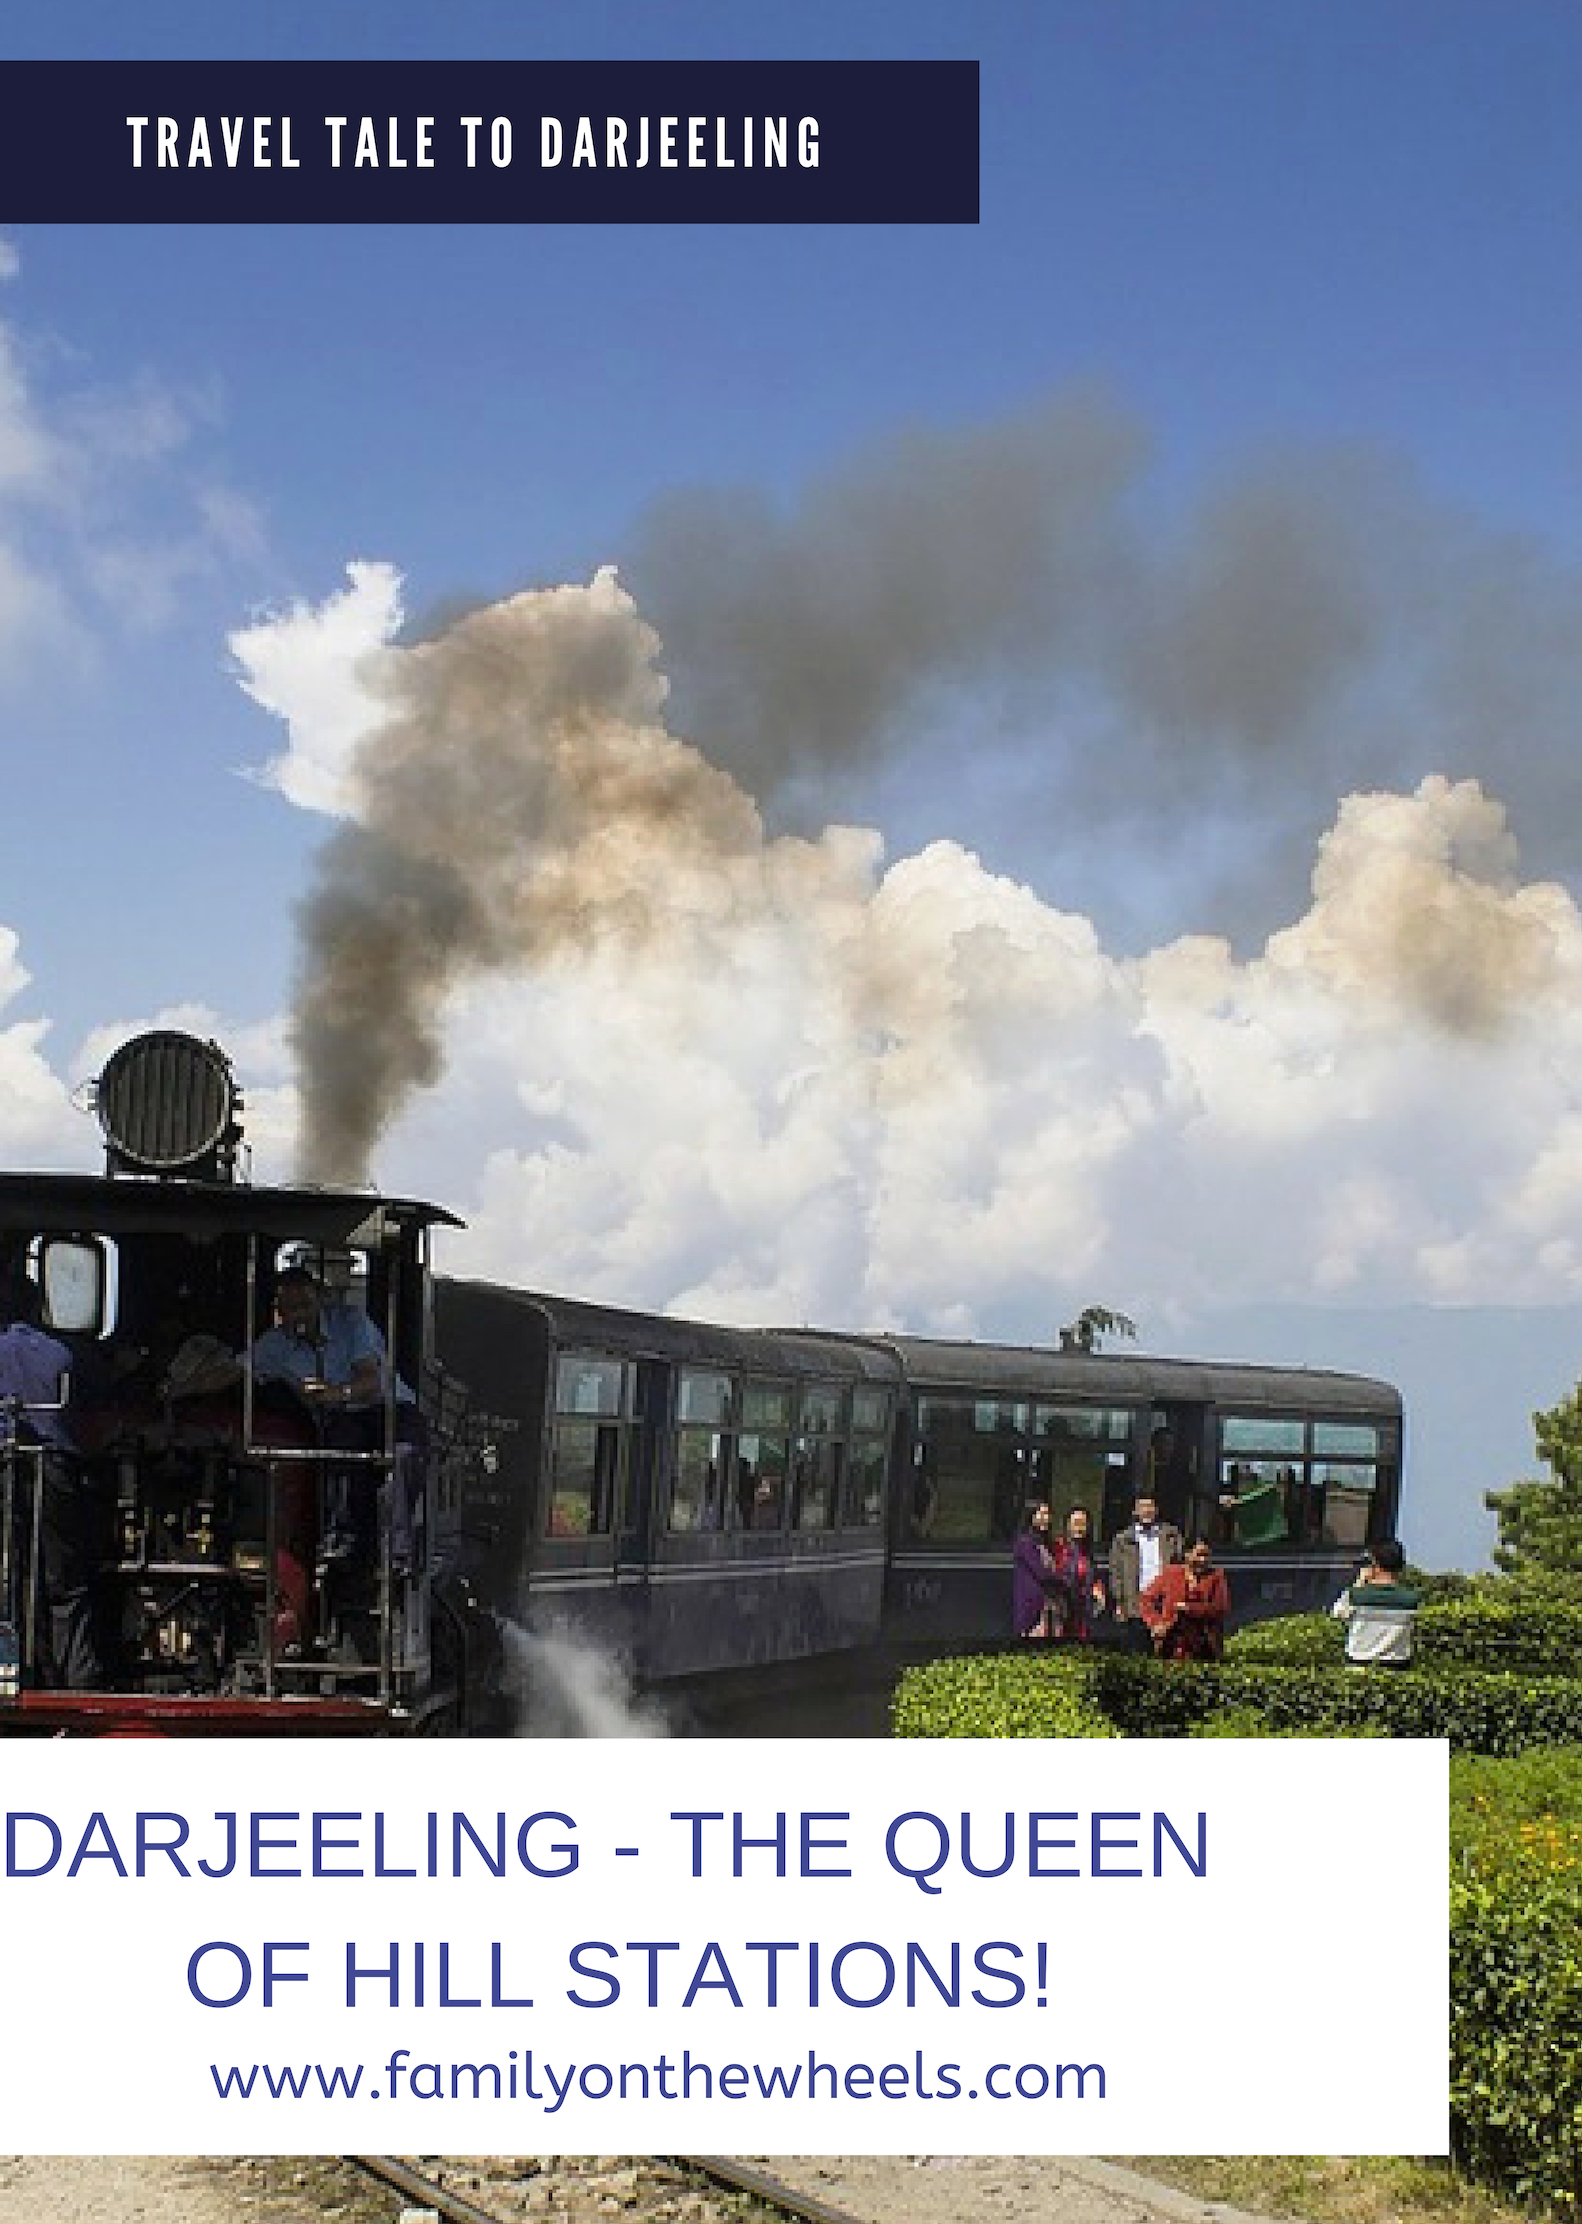 Darjeeling, the beautiful Hill Station of India, is one of the most serne and mesmerising place. Right from Nature to adventure, it has all for explorers. #darjeeling #northeastIndia #gangtok #sikkim #kanchenjunga #travelstories #travelbloggers #toytrain #hillstationinindia #riverrafting